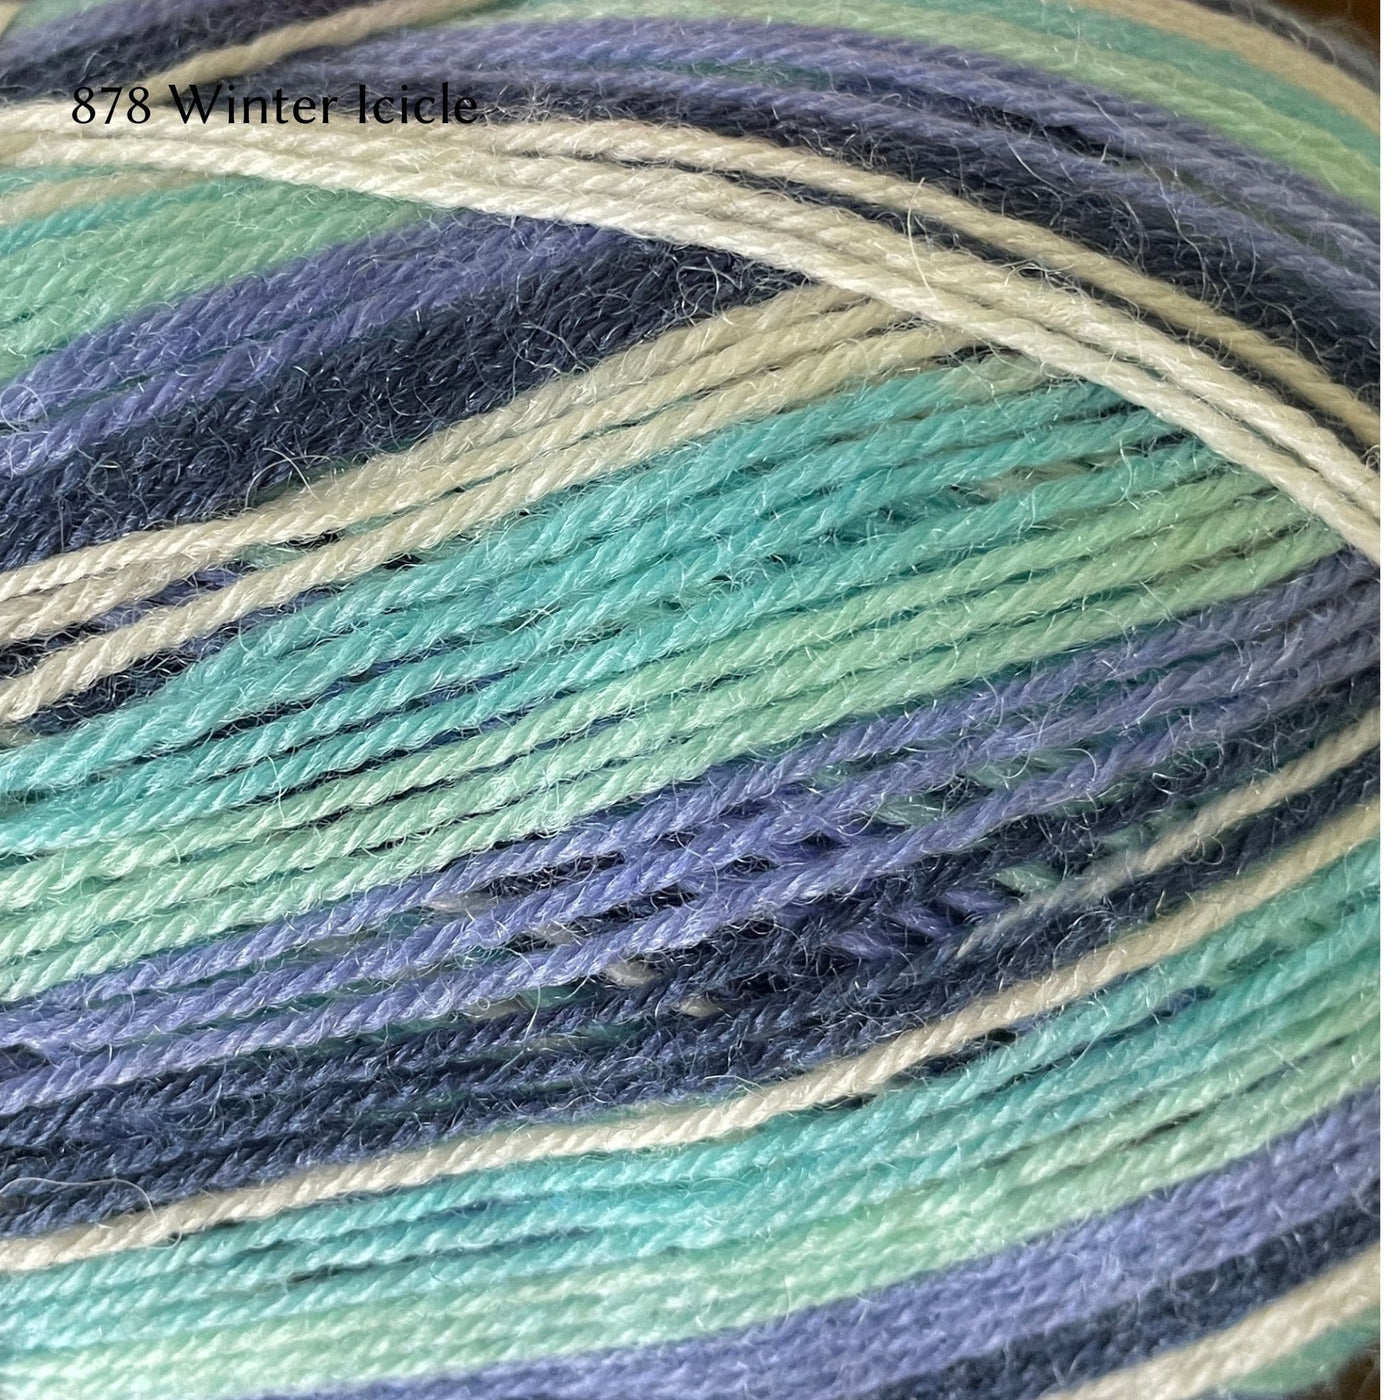 West Yorkshire Spinners Signature 4ply yarn, fingering weight, in color 878 Winter Icicle, a striping colorway in cream, aqua, seafoam, cornflower blue, and navy